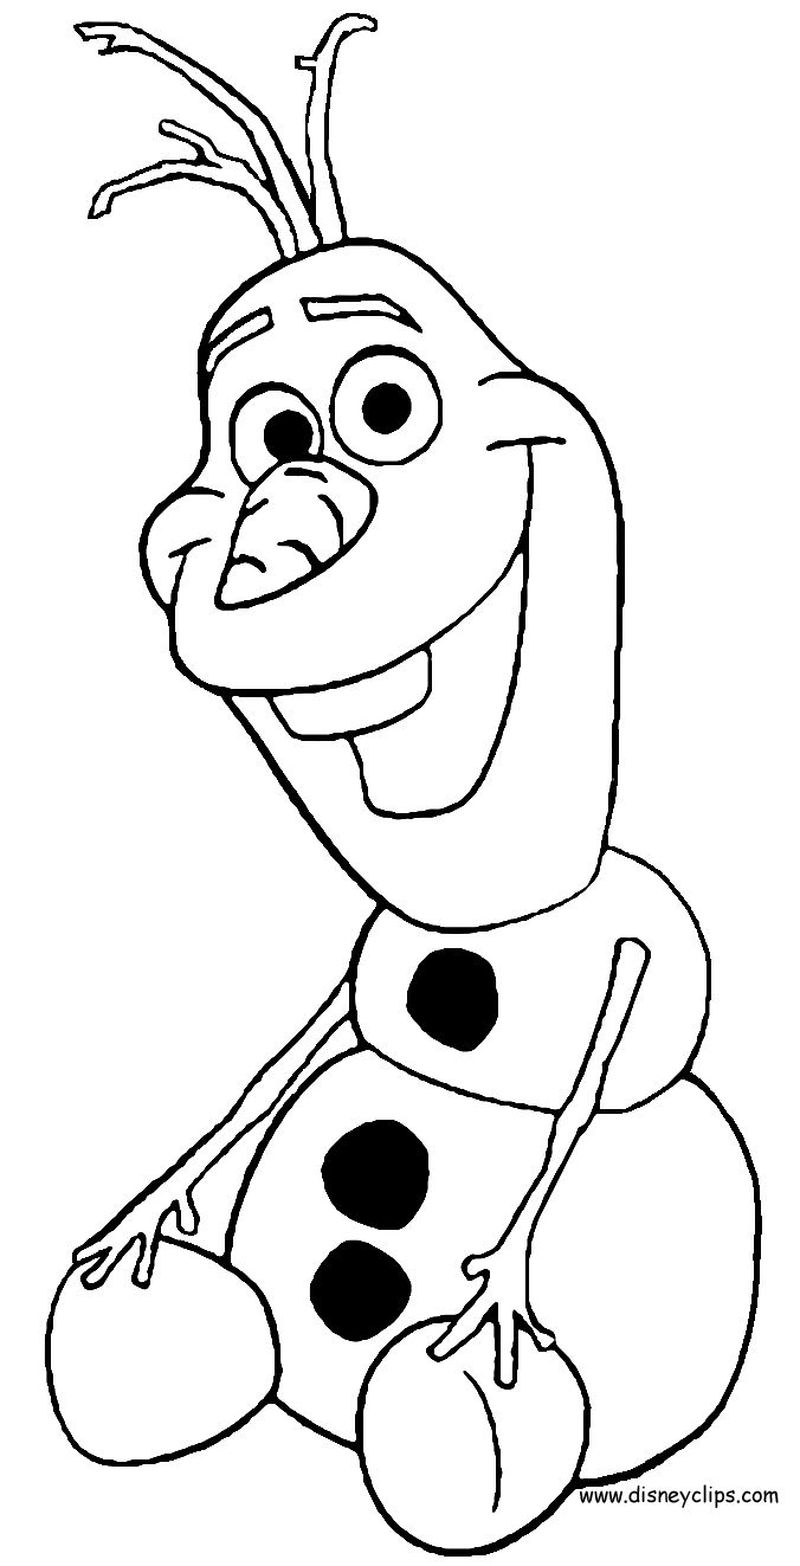 Olaf Coloring Pages Pdf